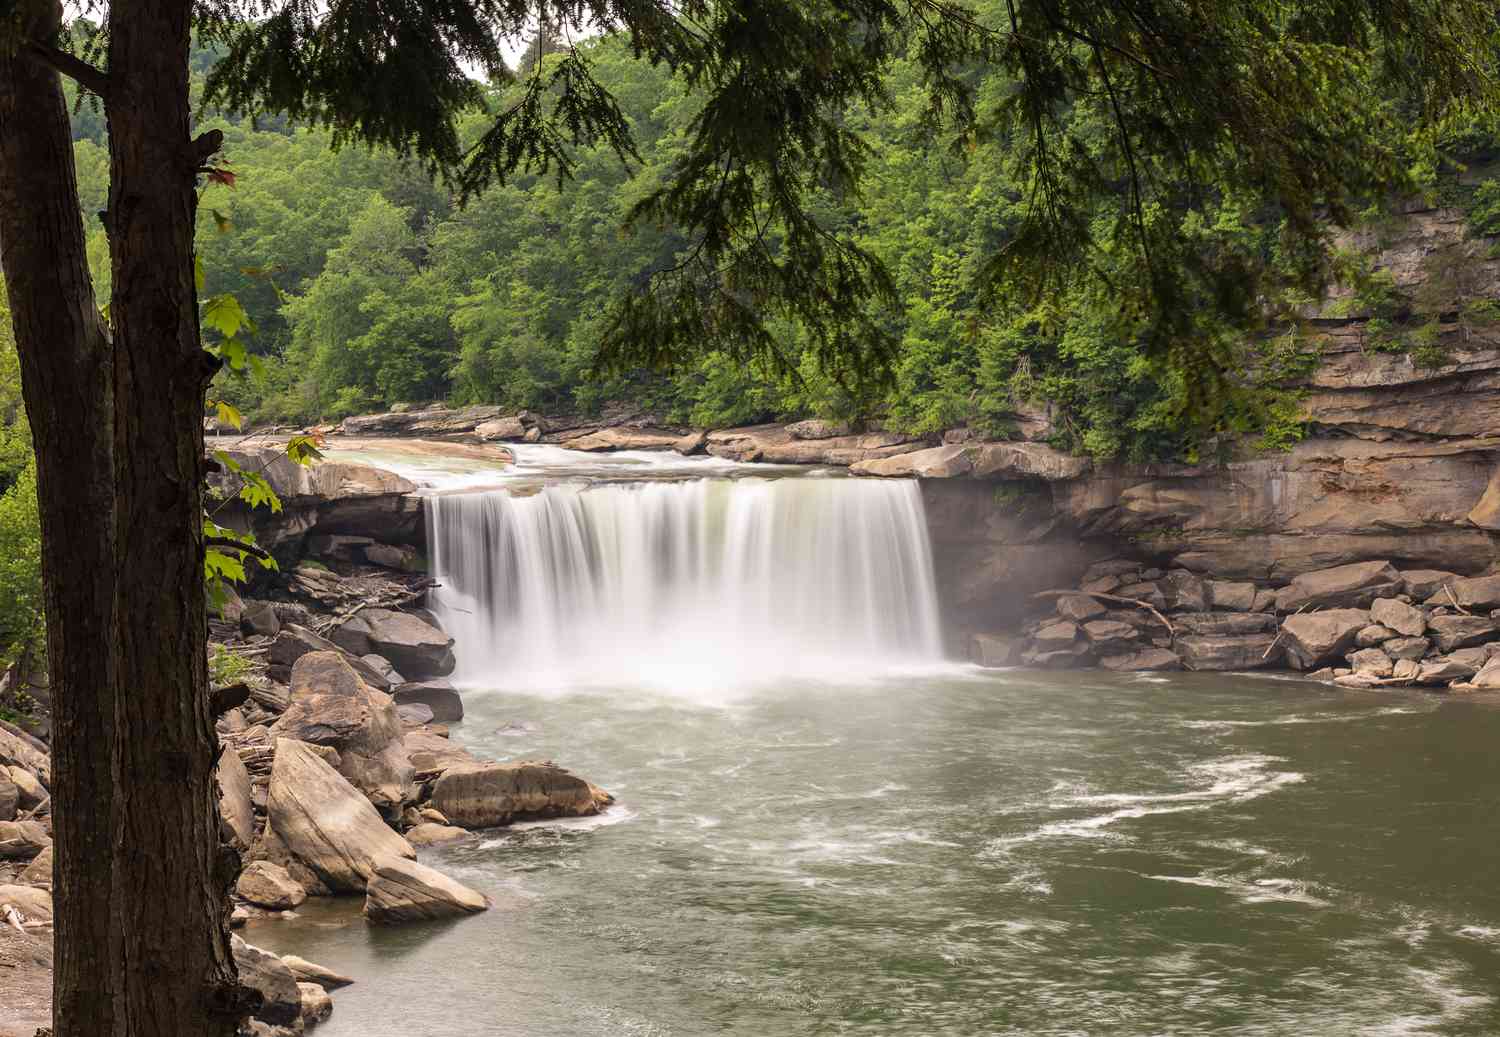 11-facts-about-natural-wonders-in-louisville-jefferson-county-kentucky